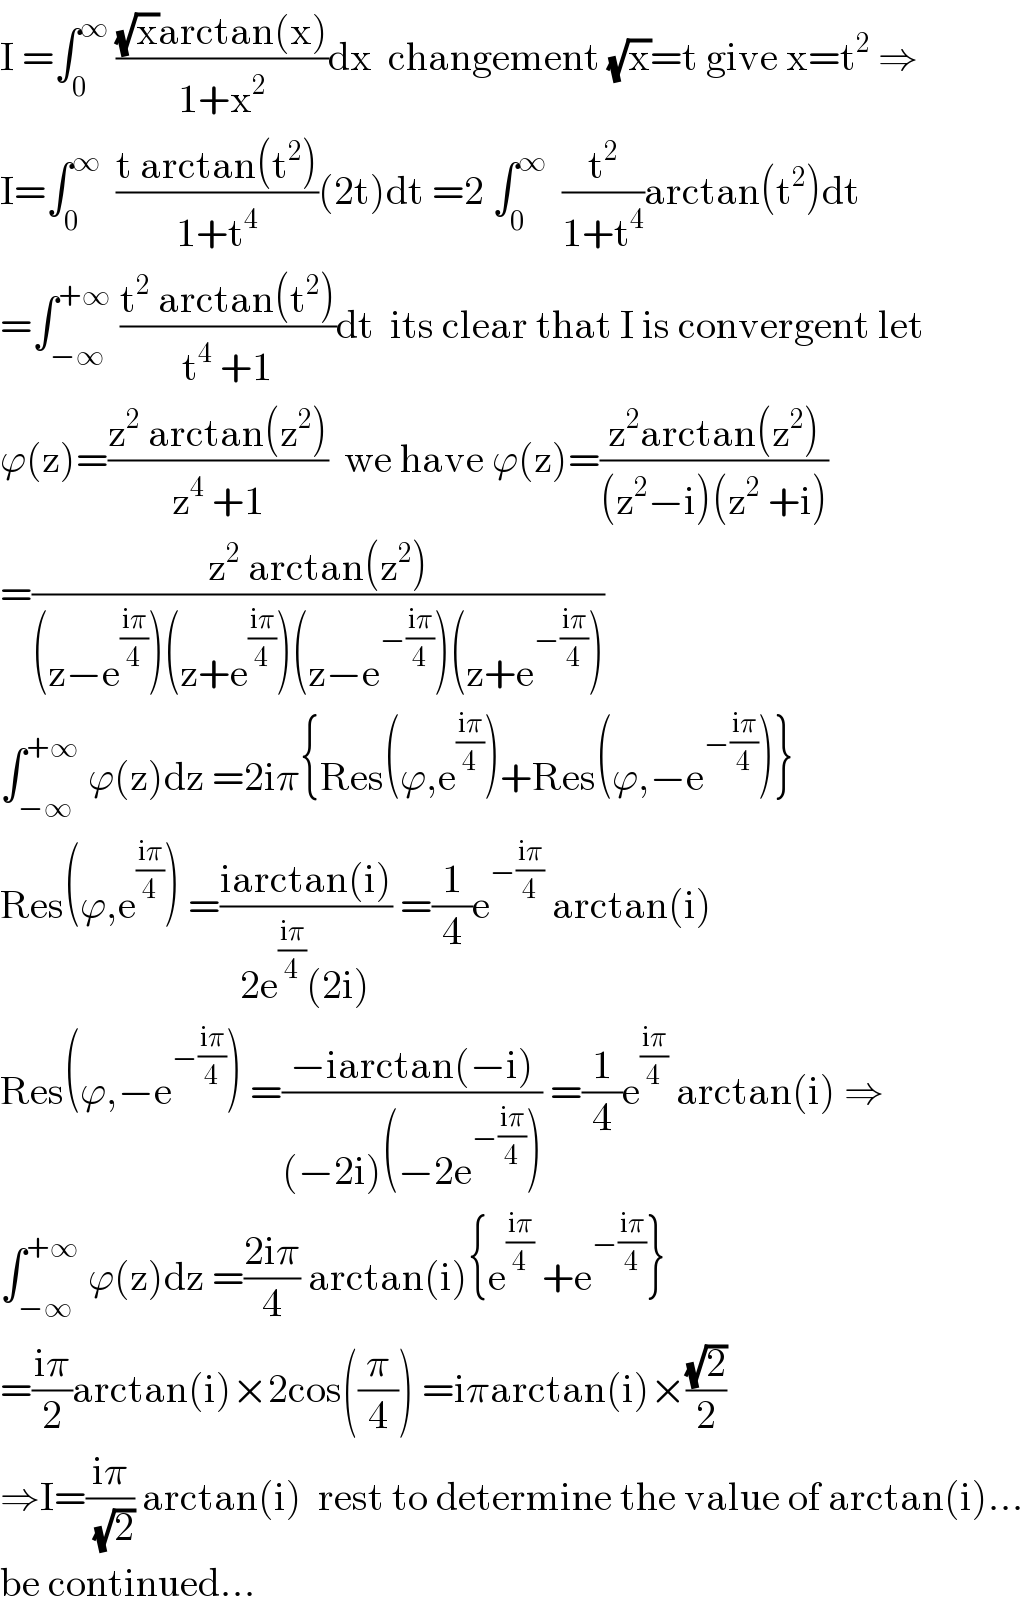 I =∫_0 ^∞  (((√x)arctan(x))/(1+x^2 ))dx  changement (√x)=t give x=t^2  ⇒  I=∫_0 ^∞   ((t arctan(t^2 ))/(1+t^4 ))(2t)dt =2 ∫_0 ^∞   (t^2 /(1+t^4 ))arctan(t^2 )dt  =∫_(−∞) ^(+∞)  ((t^2  arctan(t^2 ))/(t^4  +1))dt  its clear that I is convergent let  ϕ(z)=((z^2  arctan(z^2 ))/(z^4  +1))  we have ϕ(z)=((z^2 arctan(z^2 ))/((z^2 −i)(z^2  +i)))  =((z^2  arctan(z^2 ))/((z−e^((iπ)/4) )(z+e^((iπ)/4) )(z−e^(−((iπ)/4)) )(z+e^(−((iπ)/4)) )))  ∫_(−∞) ^(+∞)  ϕ(z)dz =2iπ{Res(ϕ,e^((iπ)/4) )+Res(ϕ,−e^(−((iπ)/4)) )}  Res(ϕ,e^((iπ)/4) ) =((iarctan(i))/(2e^((iπ)/4) (2i))) =(1/4)e^(−((iπ)/4))  arctan(i)  Res(ϕ,−e^(−((iπ)/4)) ) =((−iarctan(−i))/((−2i)(−2e^(−((iπ)/4)) ))) =(1/4)e^((iπ)/4)  arctan(i) ⇒  ∫_(−∞) ^(+∞)  ϕ(z)dz =((2iπ)/4) arctan(i){e^((iπ)/4)  +e^(−((iπ)/4)) }  =((iπ)/2)arctan(i)×2cos((π/4)) =iπarctan(i)×((√2)/2)  ⇒I=((iπ)/( (√2))) arctan(i)  rest to determine the value of arctan(i)...  be continued...  